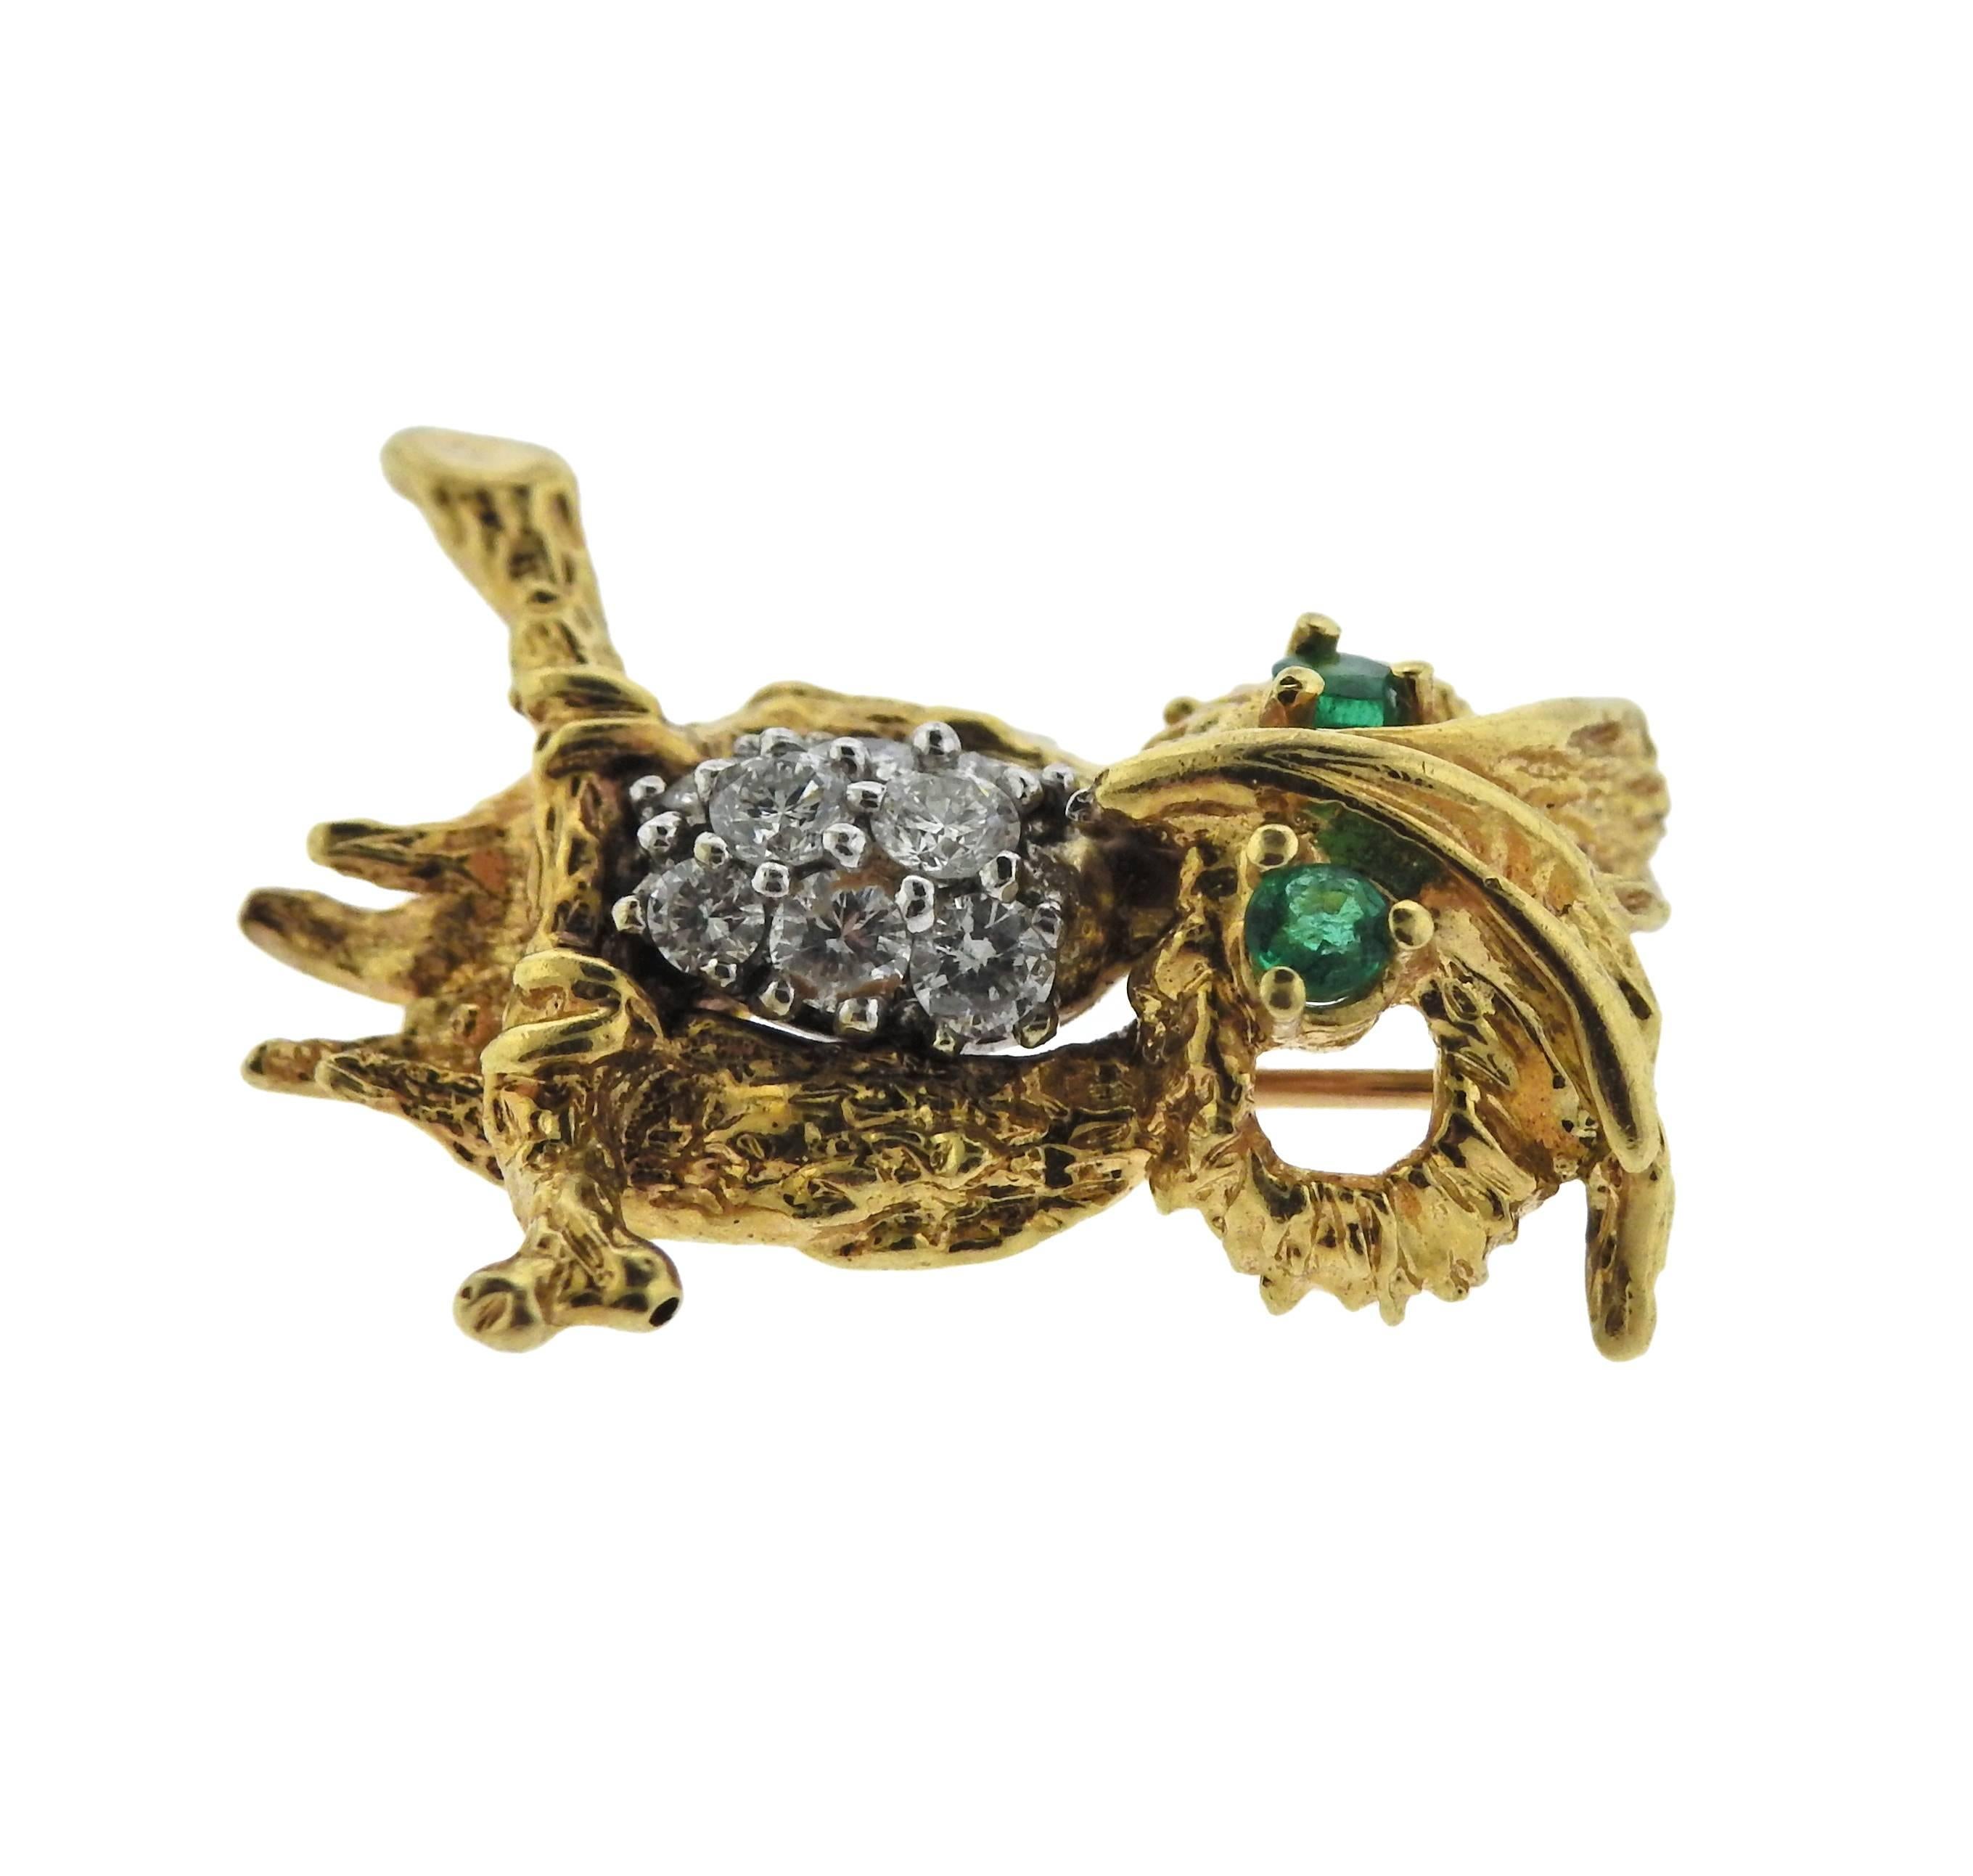 18k gold owl brooch from the 1960's, featuring approximately 0.40ctw of G-H/SI1 diamonds, and emerald eyes. Brooch measures 25mm x 23mm and weighs 6.8 grams. 